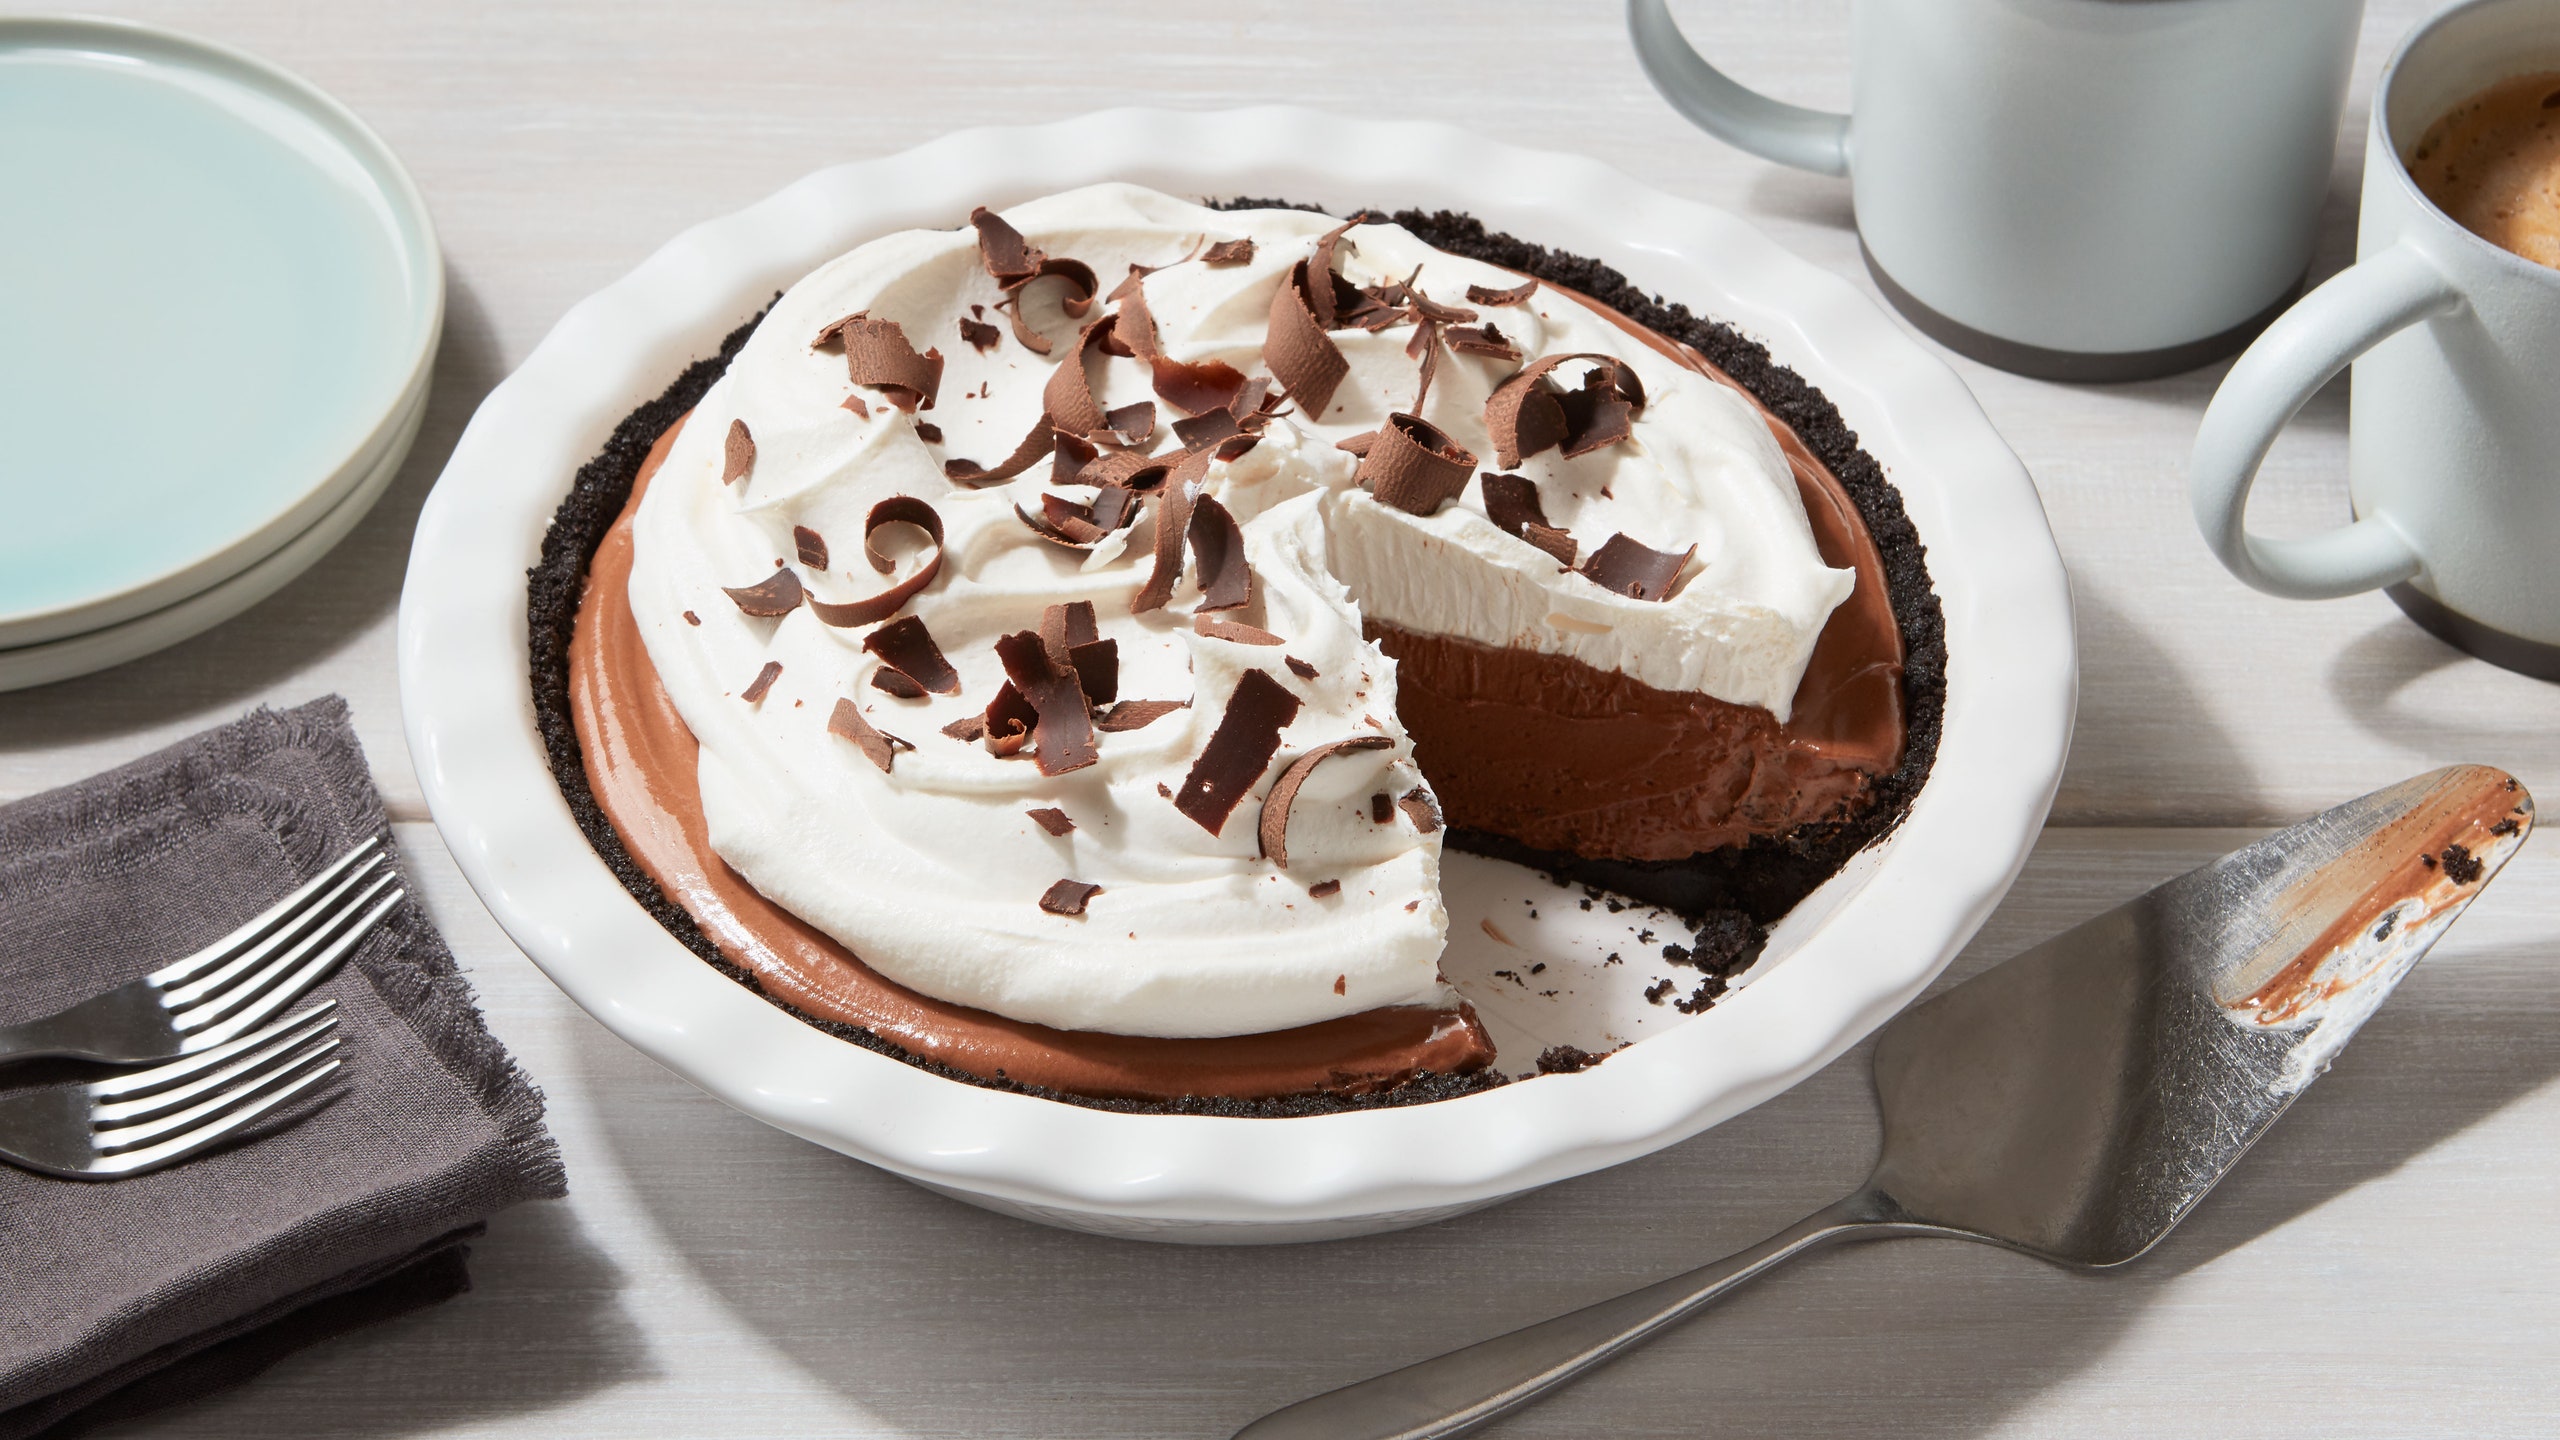 A pie of chocolate filling on a Oreo cookie crust topping with whipped cream and chocolate shavings.